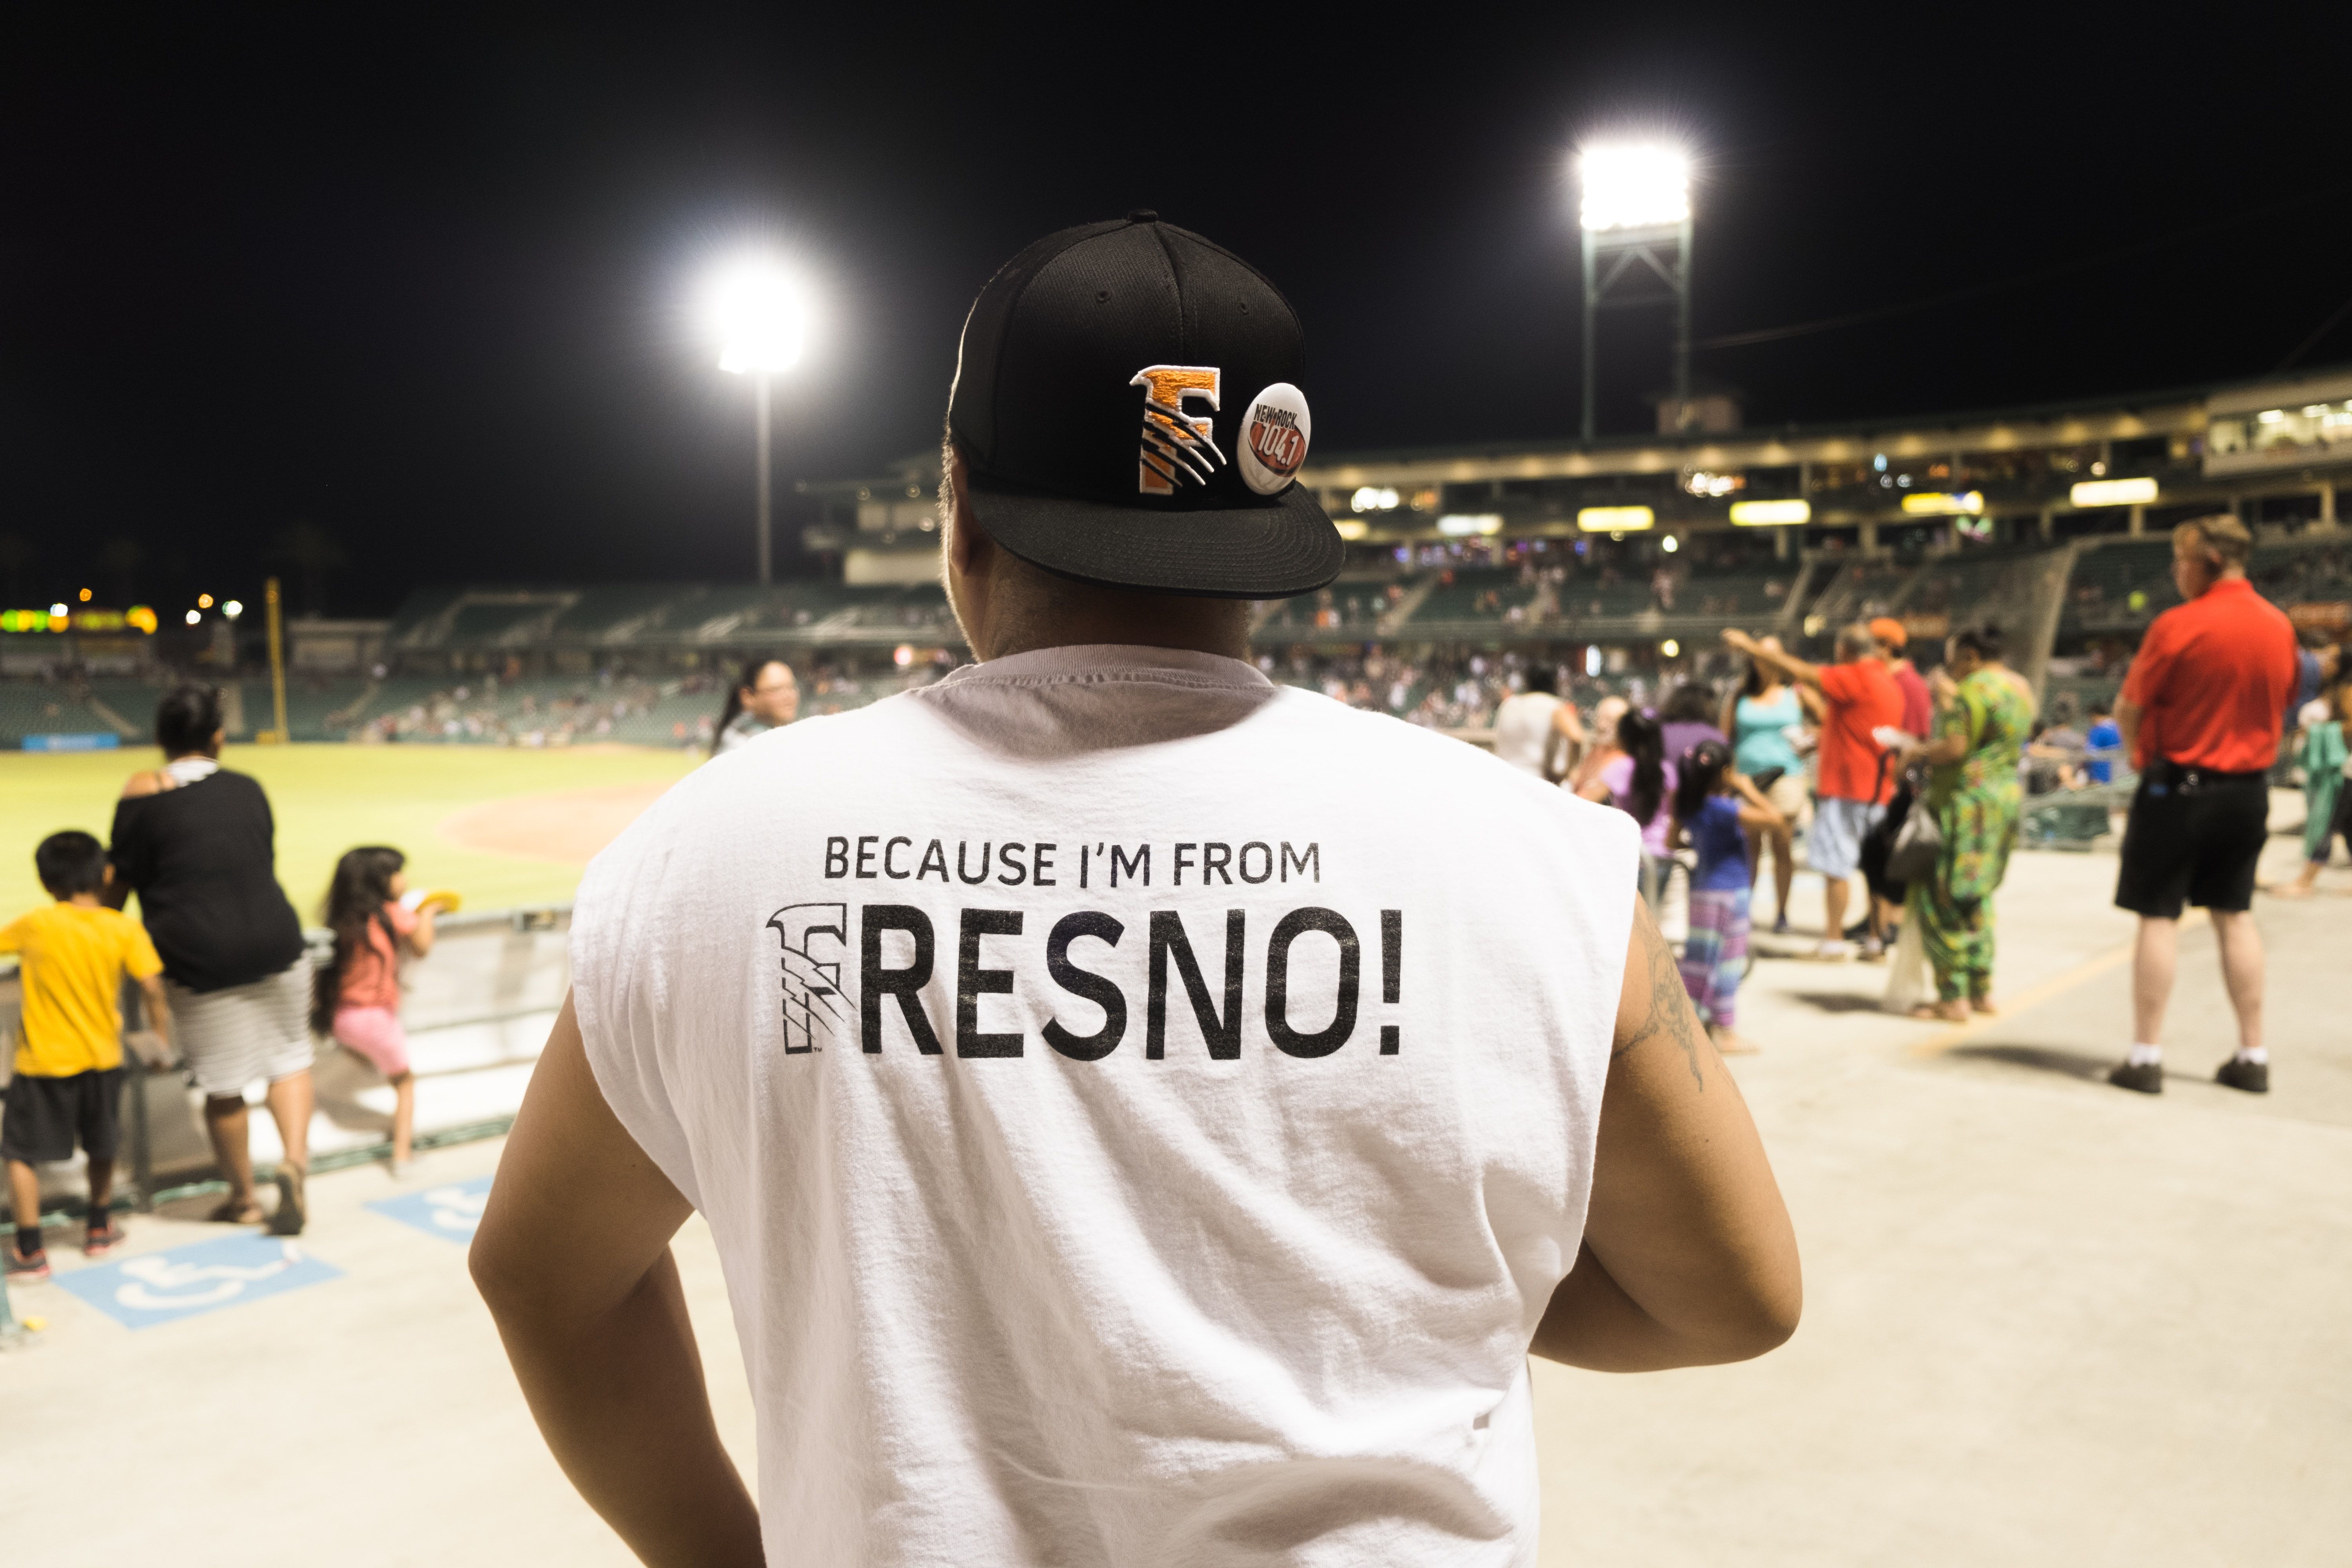 Fan at a Minor League Baseball game in Fresno